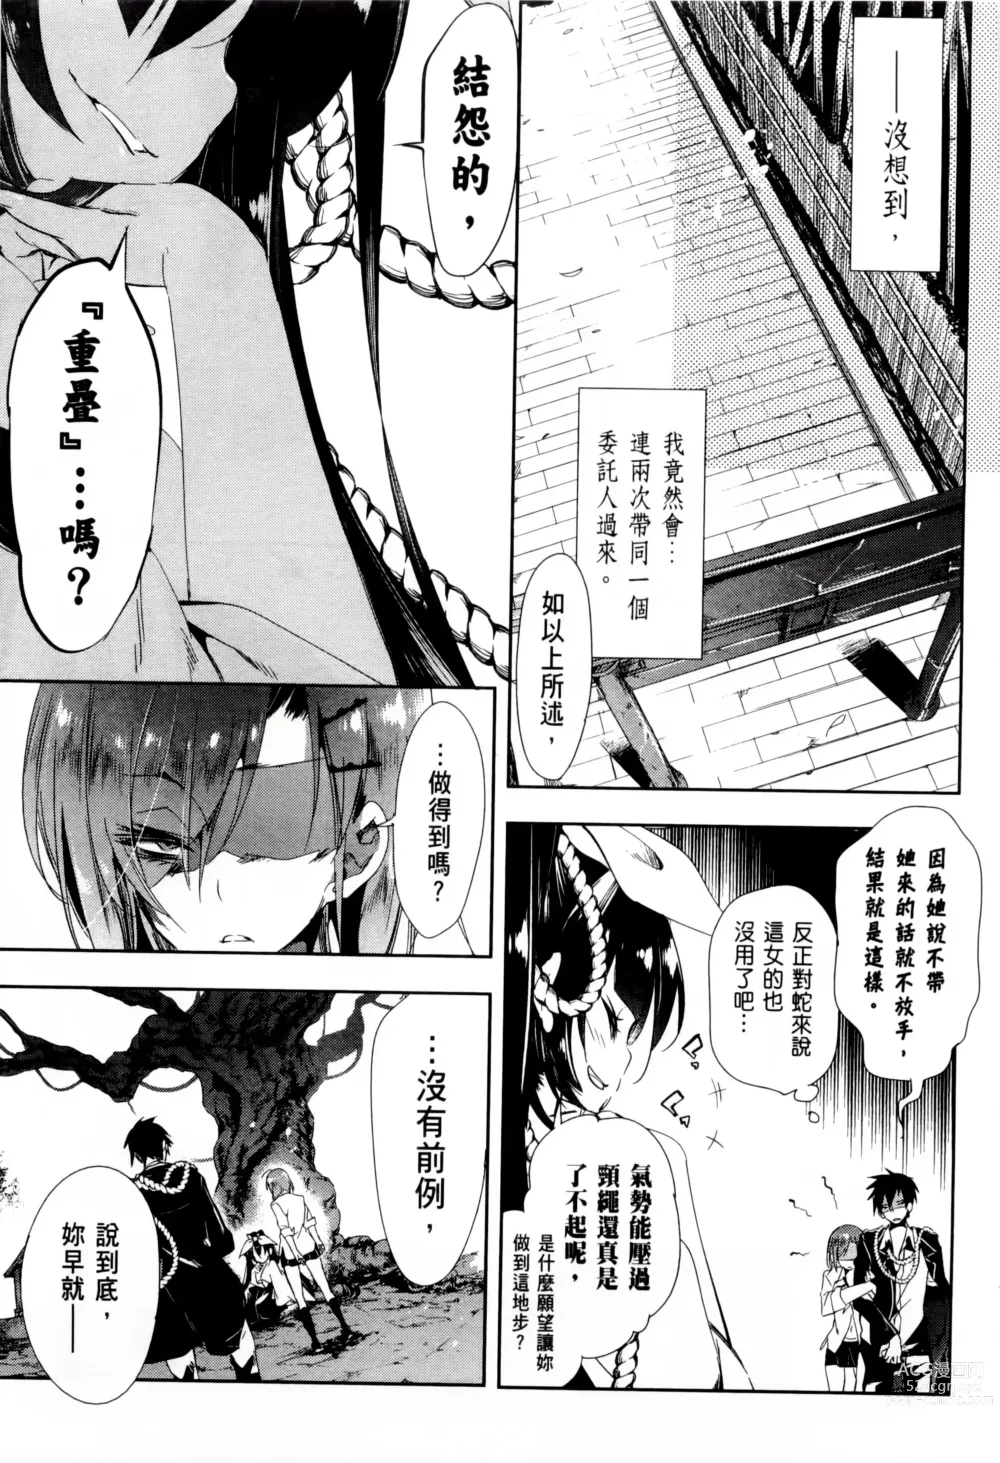 Page 167 of manga 神さまの怨結び 第2巻